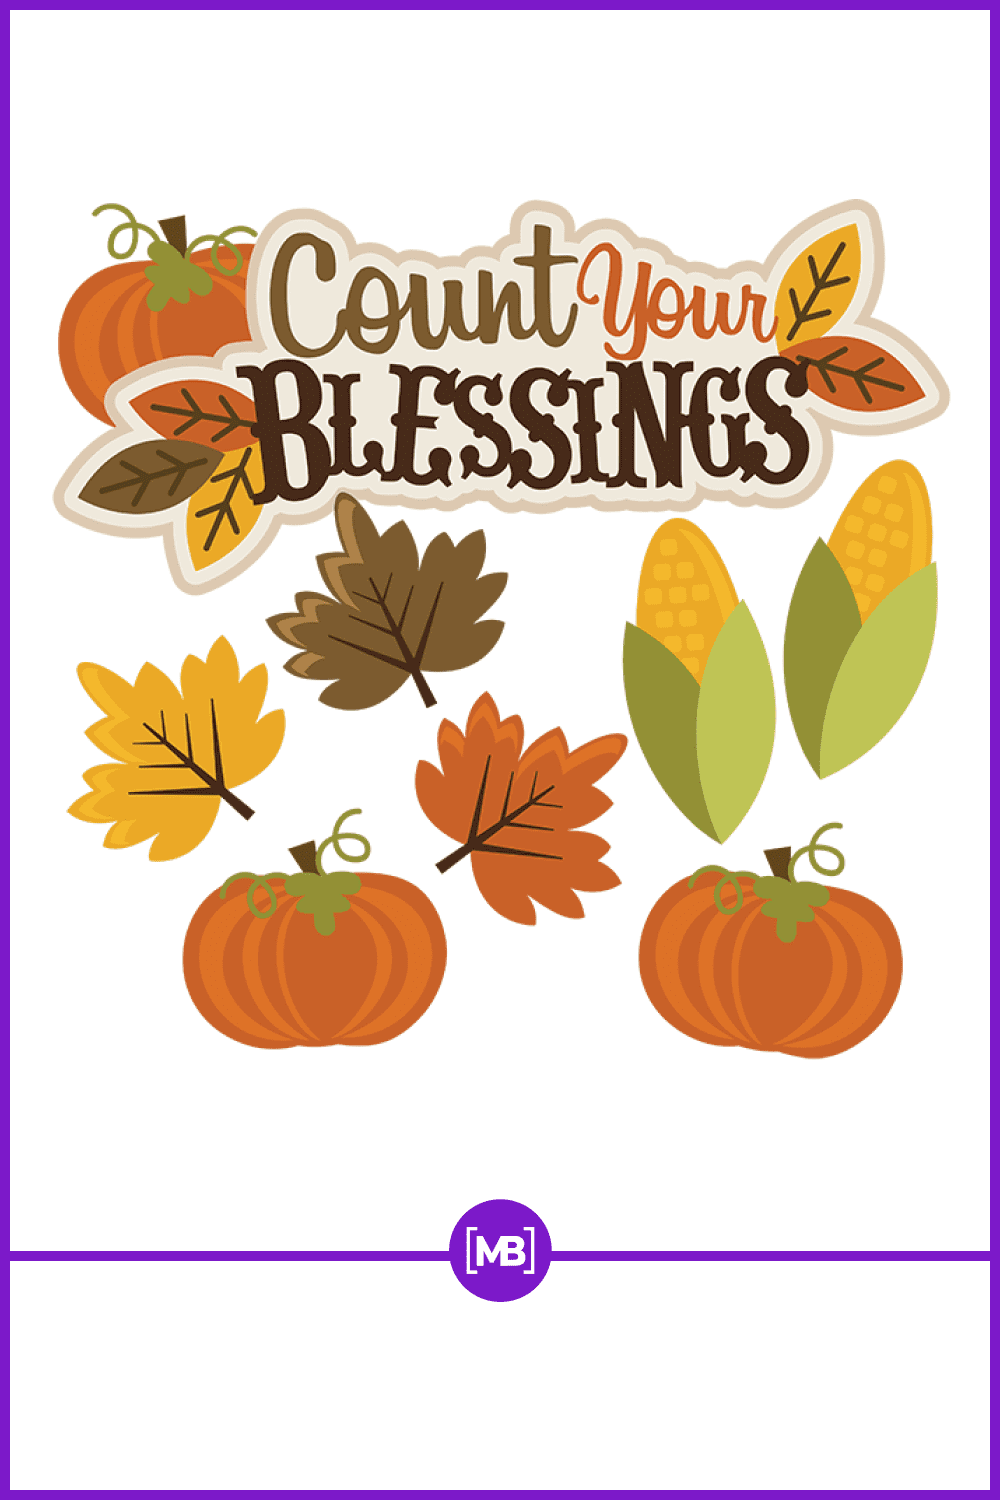 Thanksgiving clipart in autumn style.